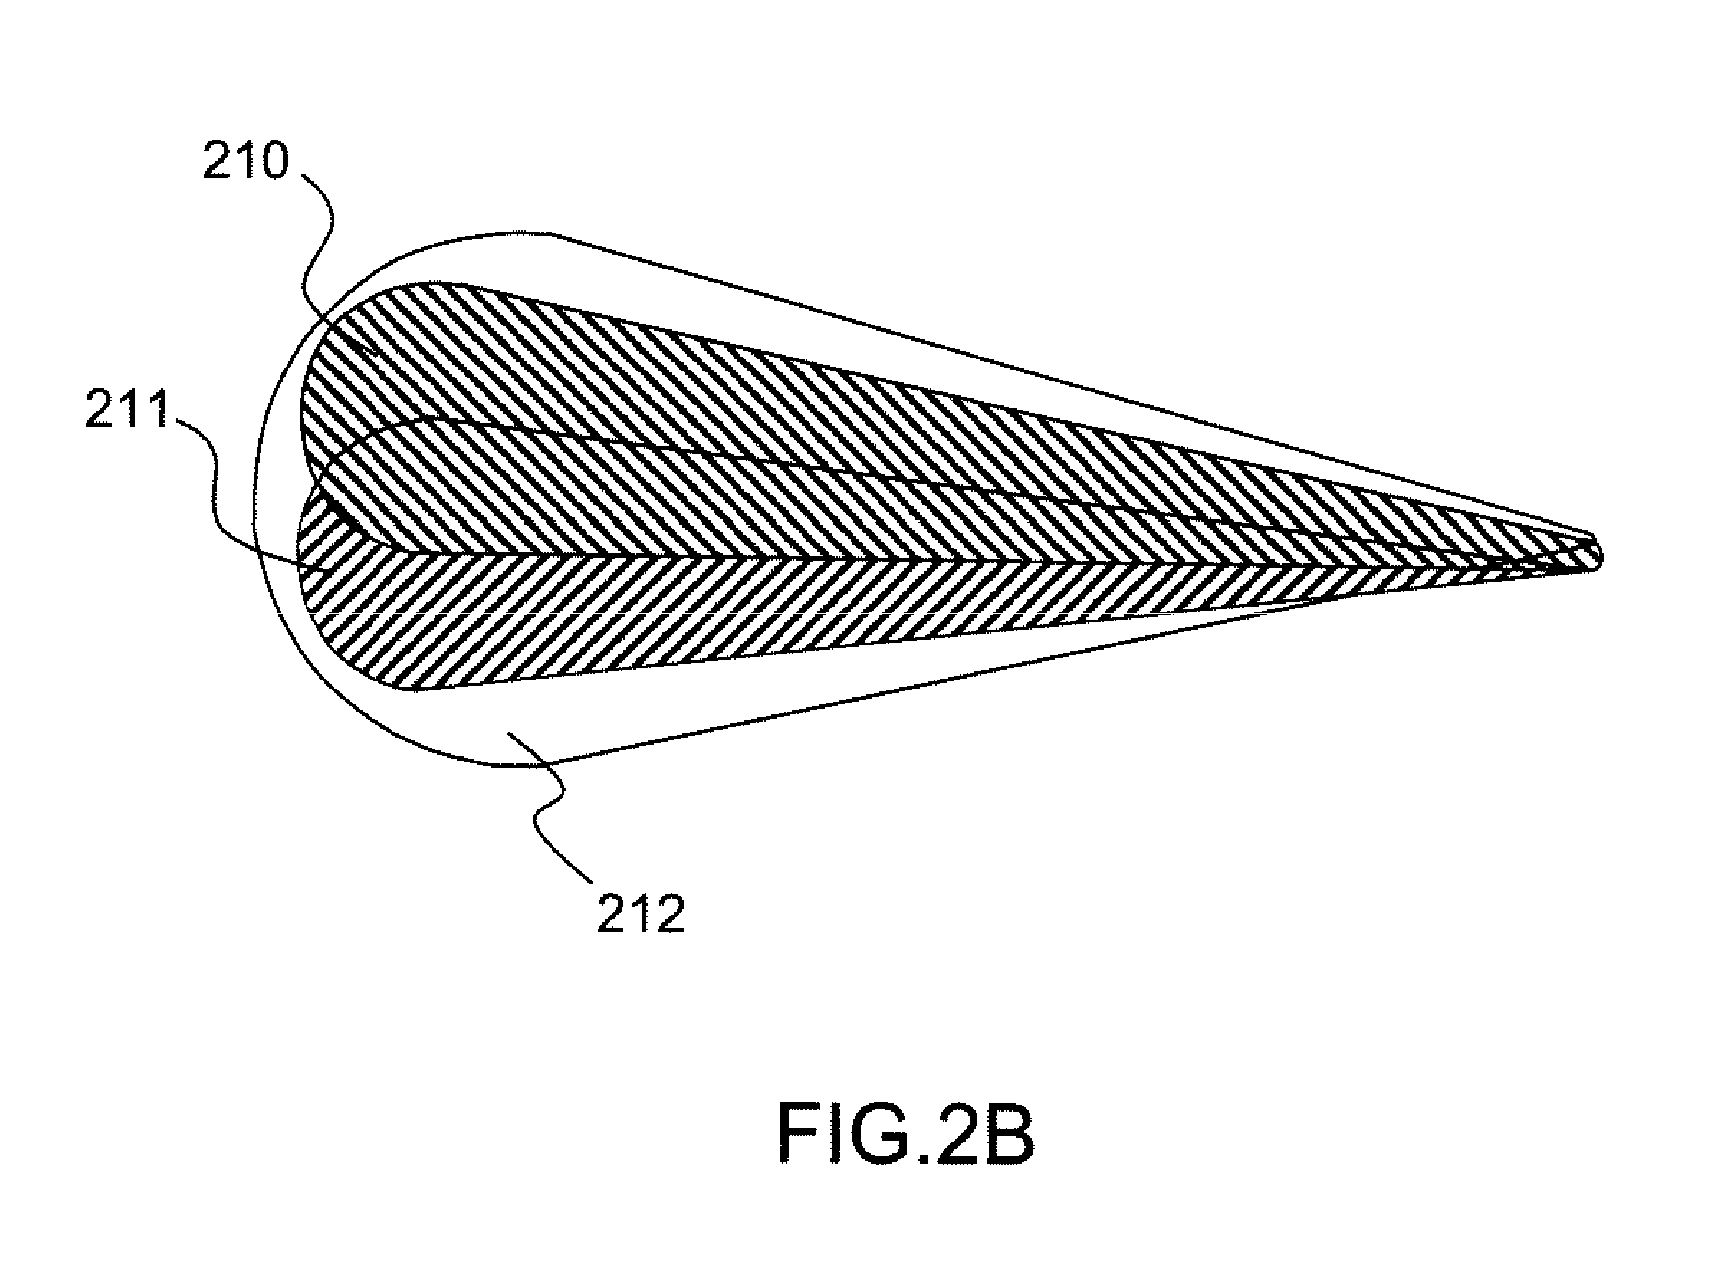 Broadband Multifunction Airborne Radar Device with a Wide Angular Coverage for Detection and Tracking, Notably for a Sense-and-Avoid Function